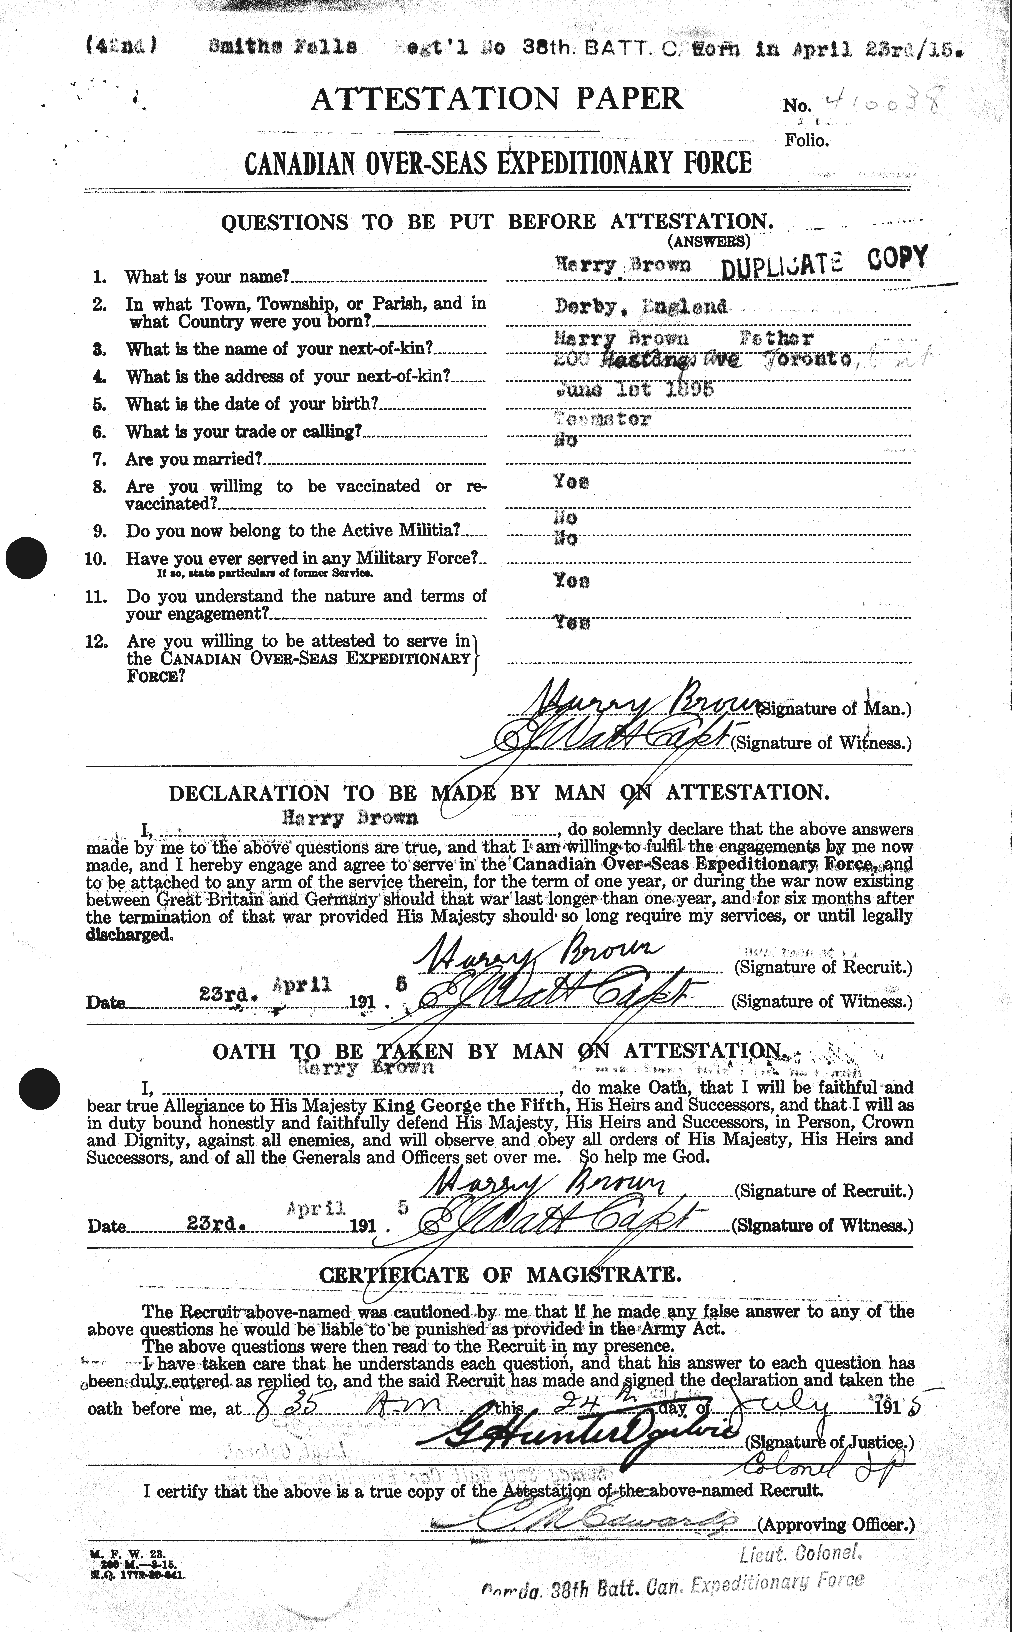 Personnel Records of the First World War - CEF 265428a